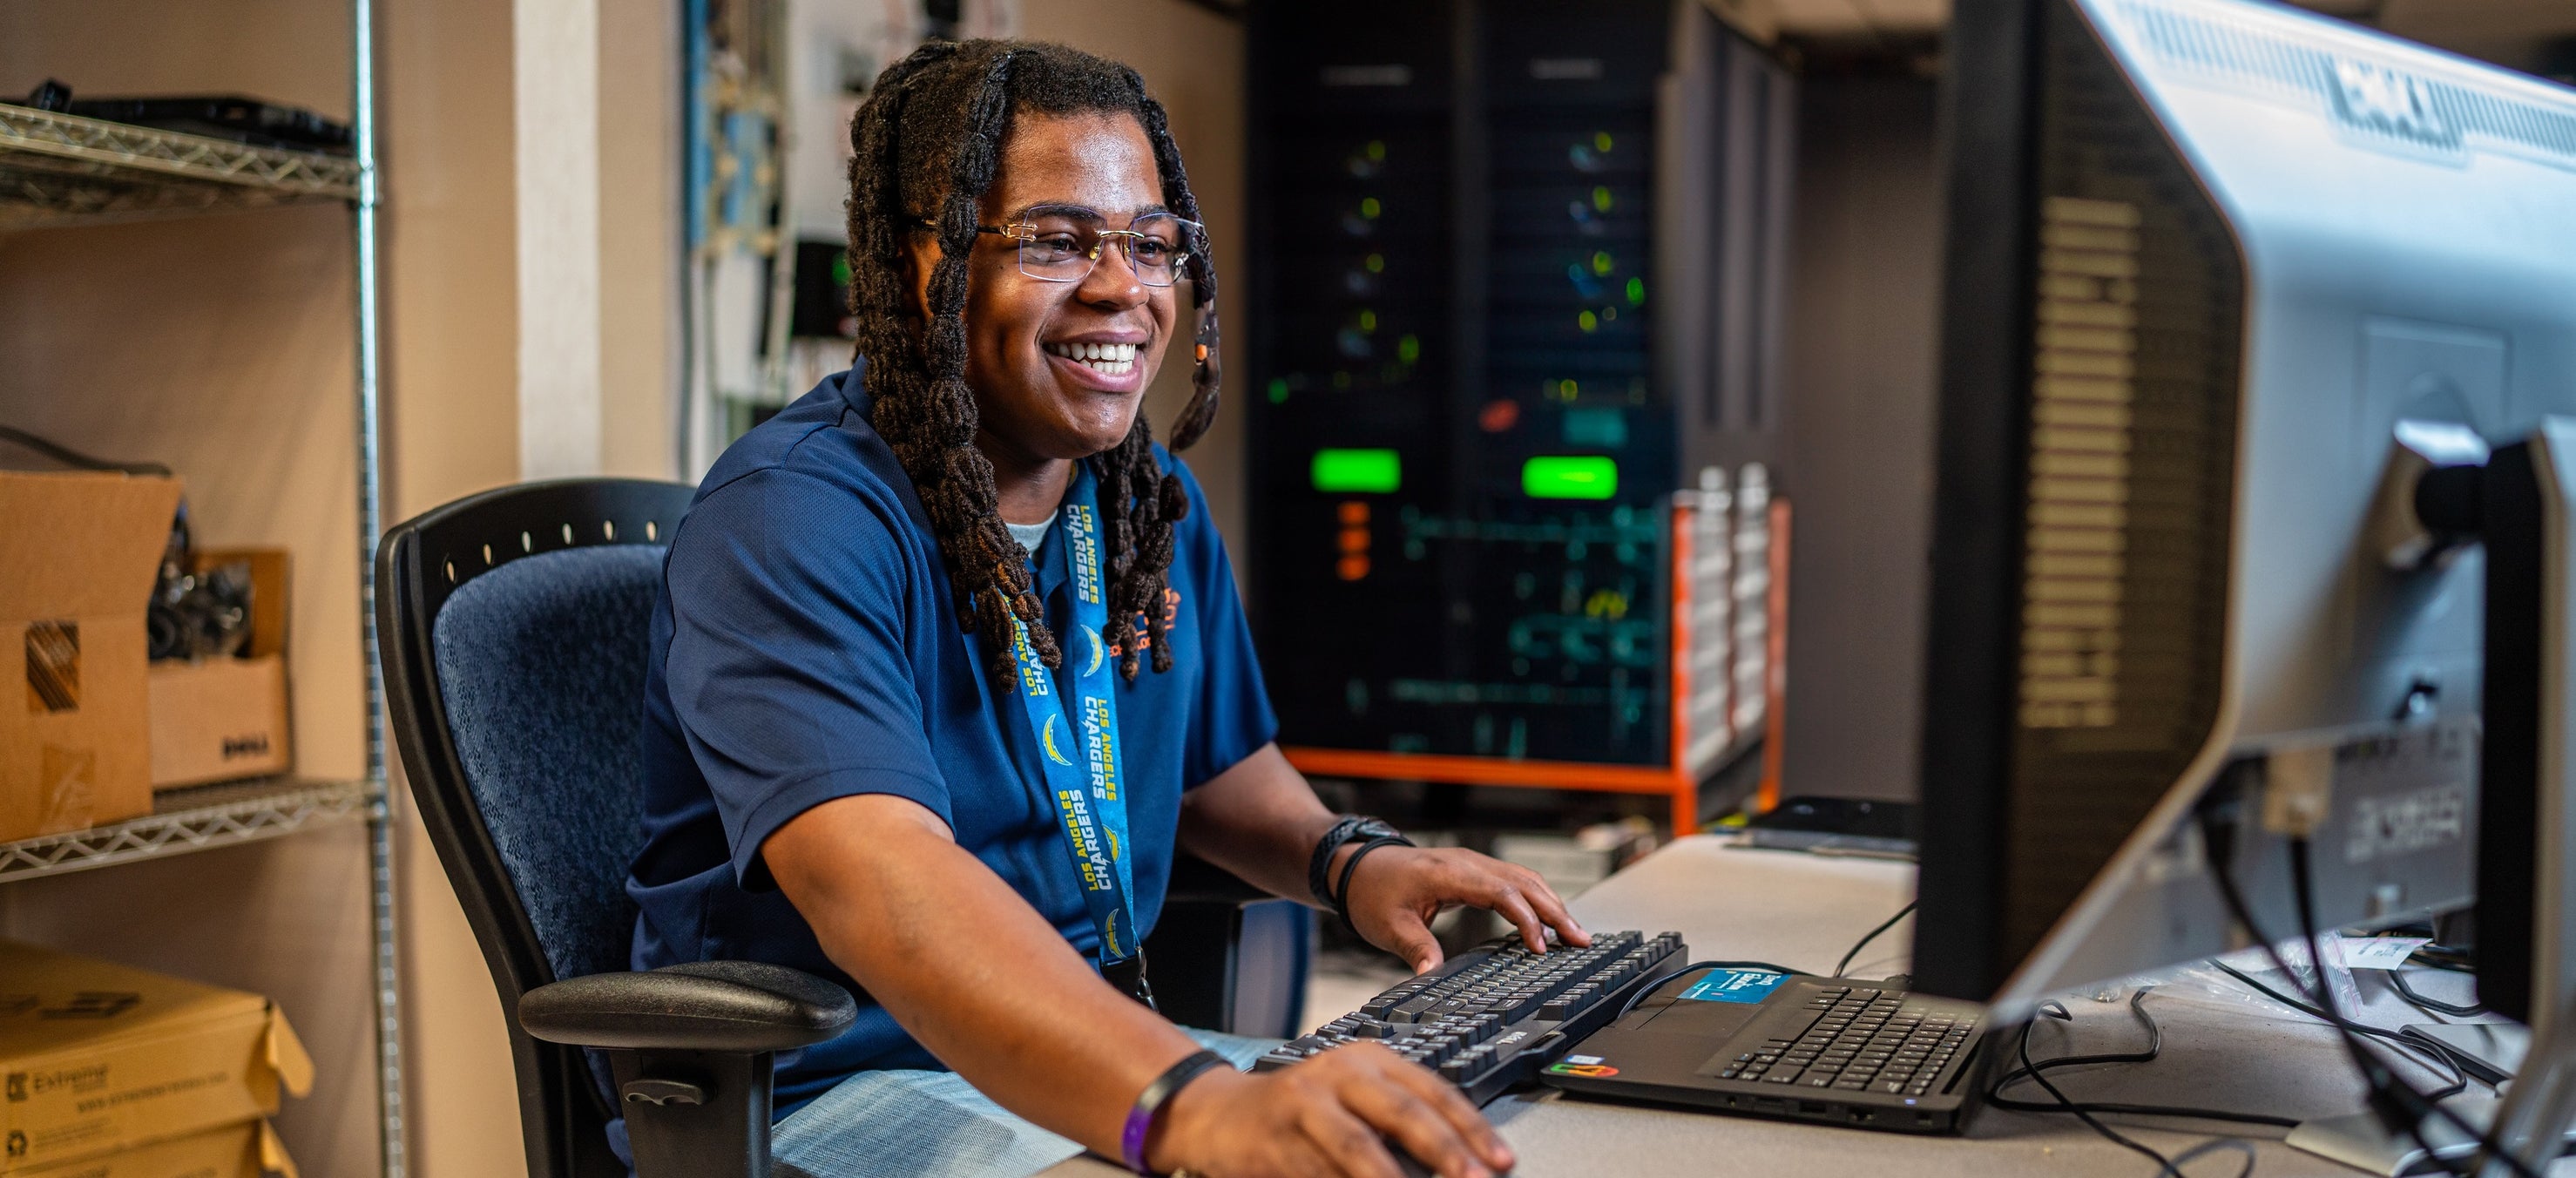 Michael King II, a graduate of the Spring ISD's Carl Wunsche Sr. High School, utilized the district's Career and Technical Education programs while in high school. He now works as an A/V technician in the district.